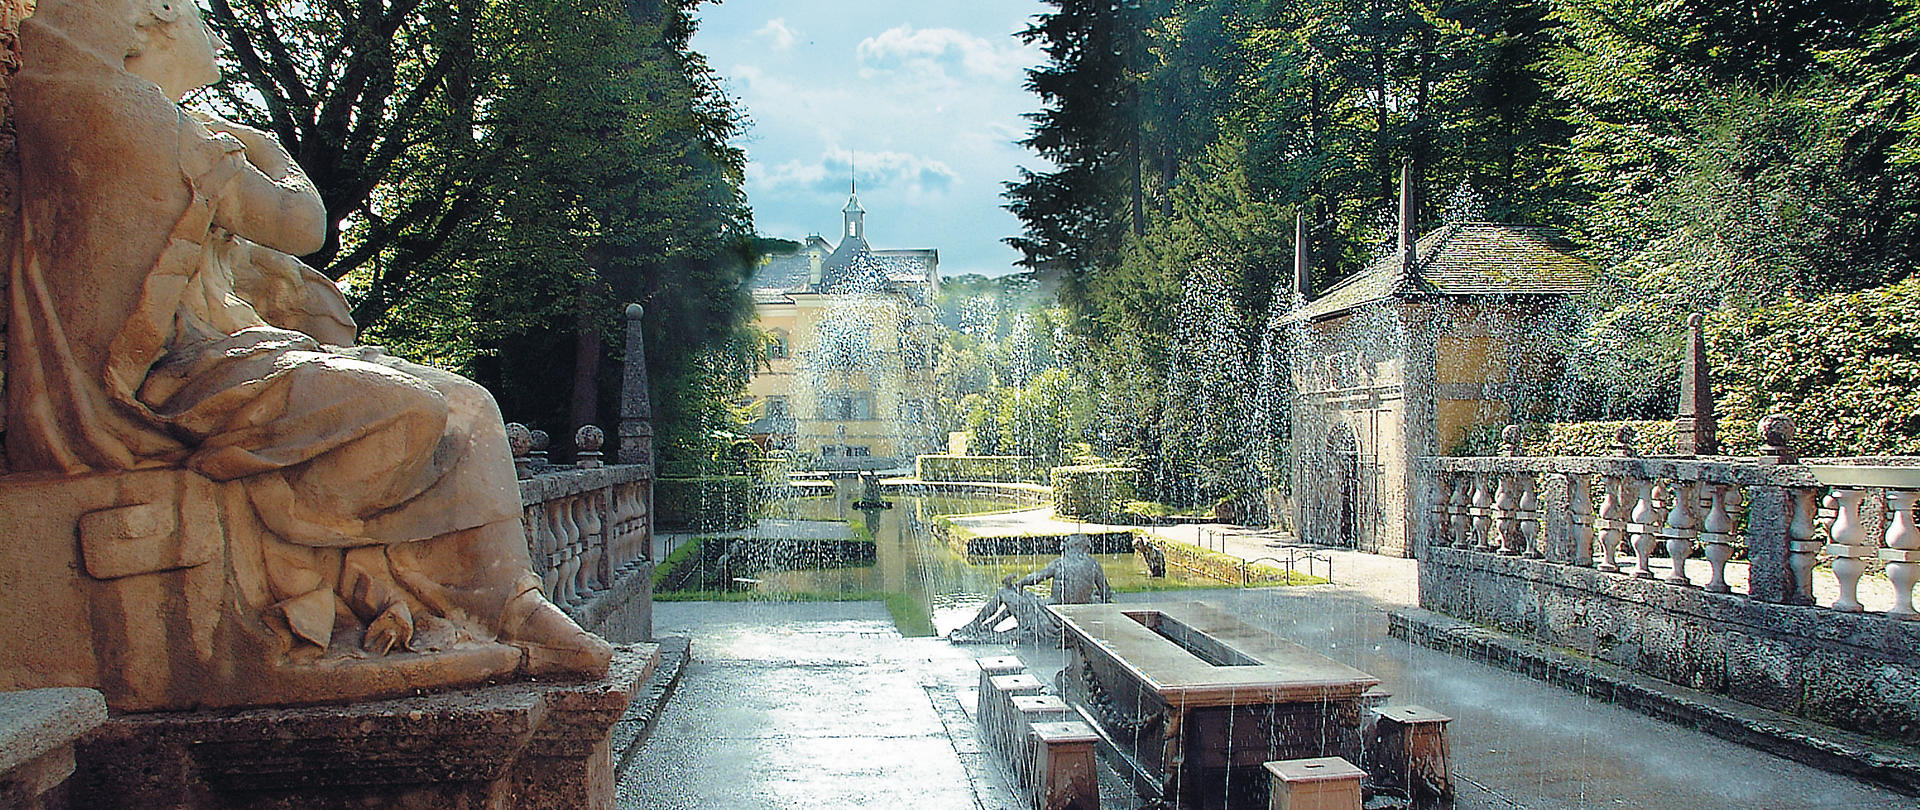 Hellbrunn Castle and Trick Fountains